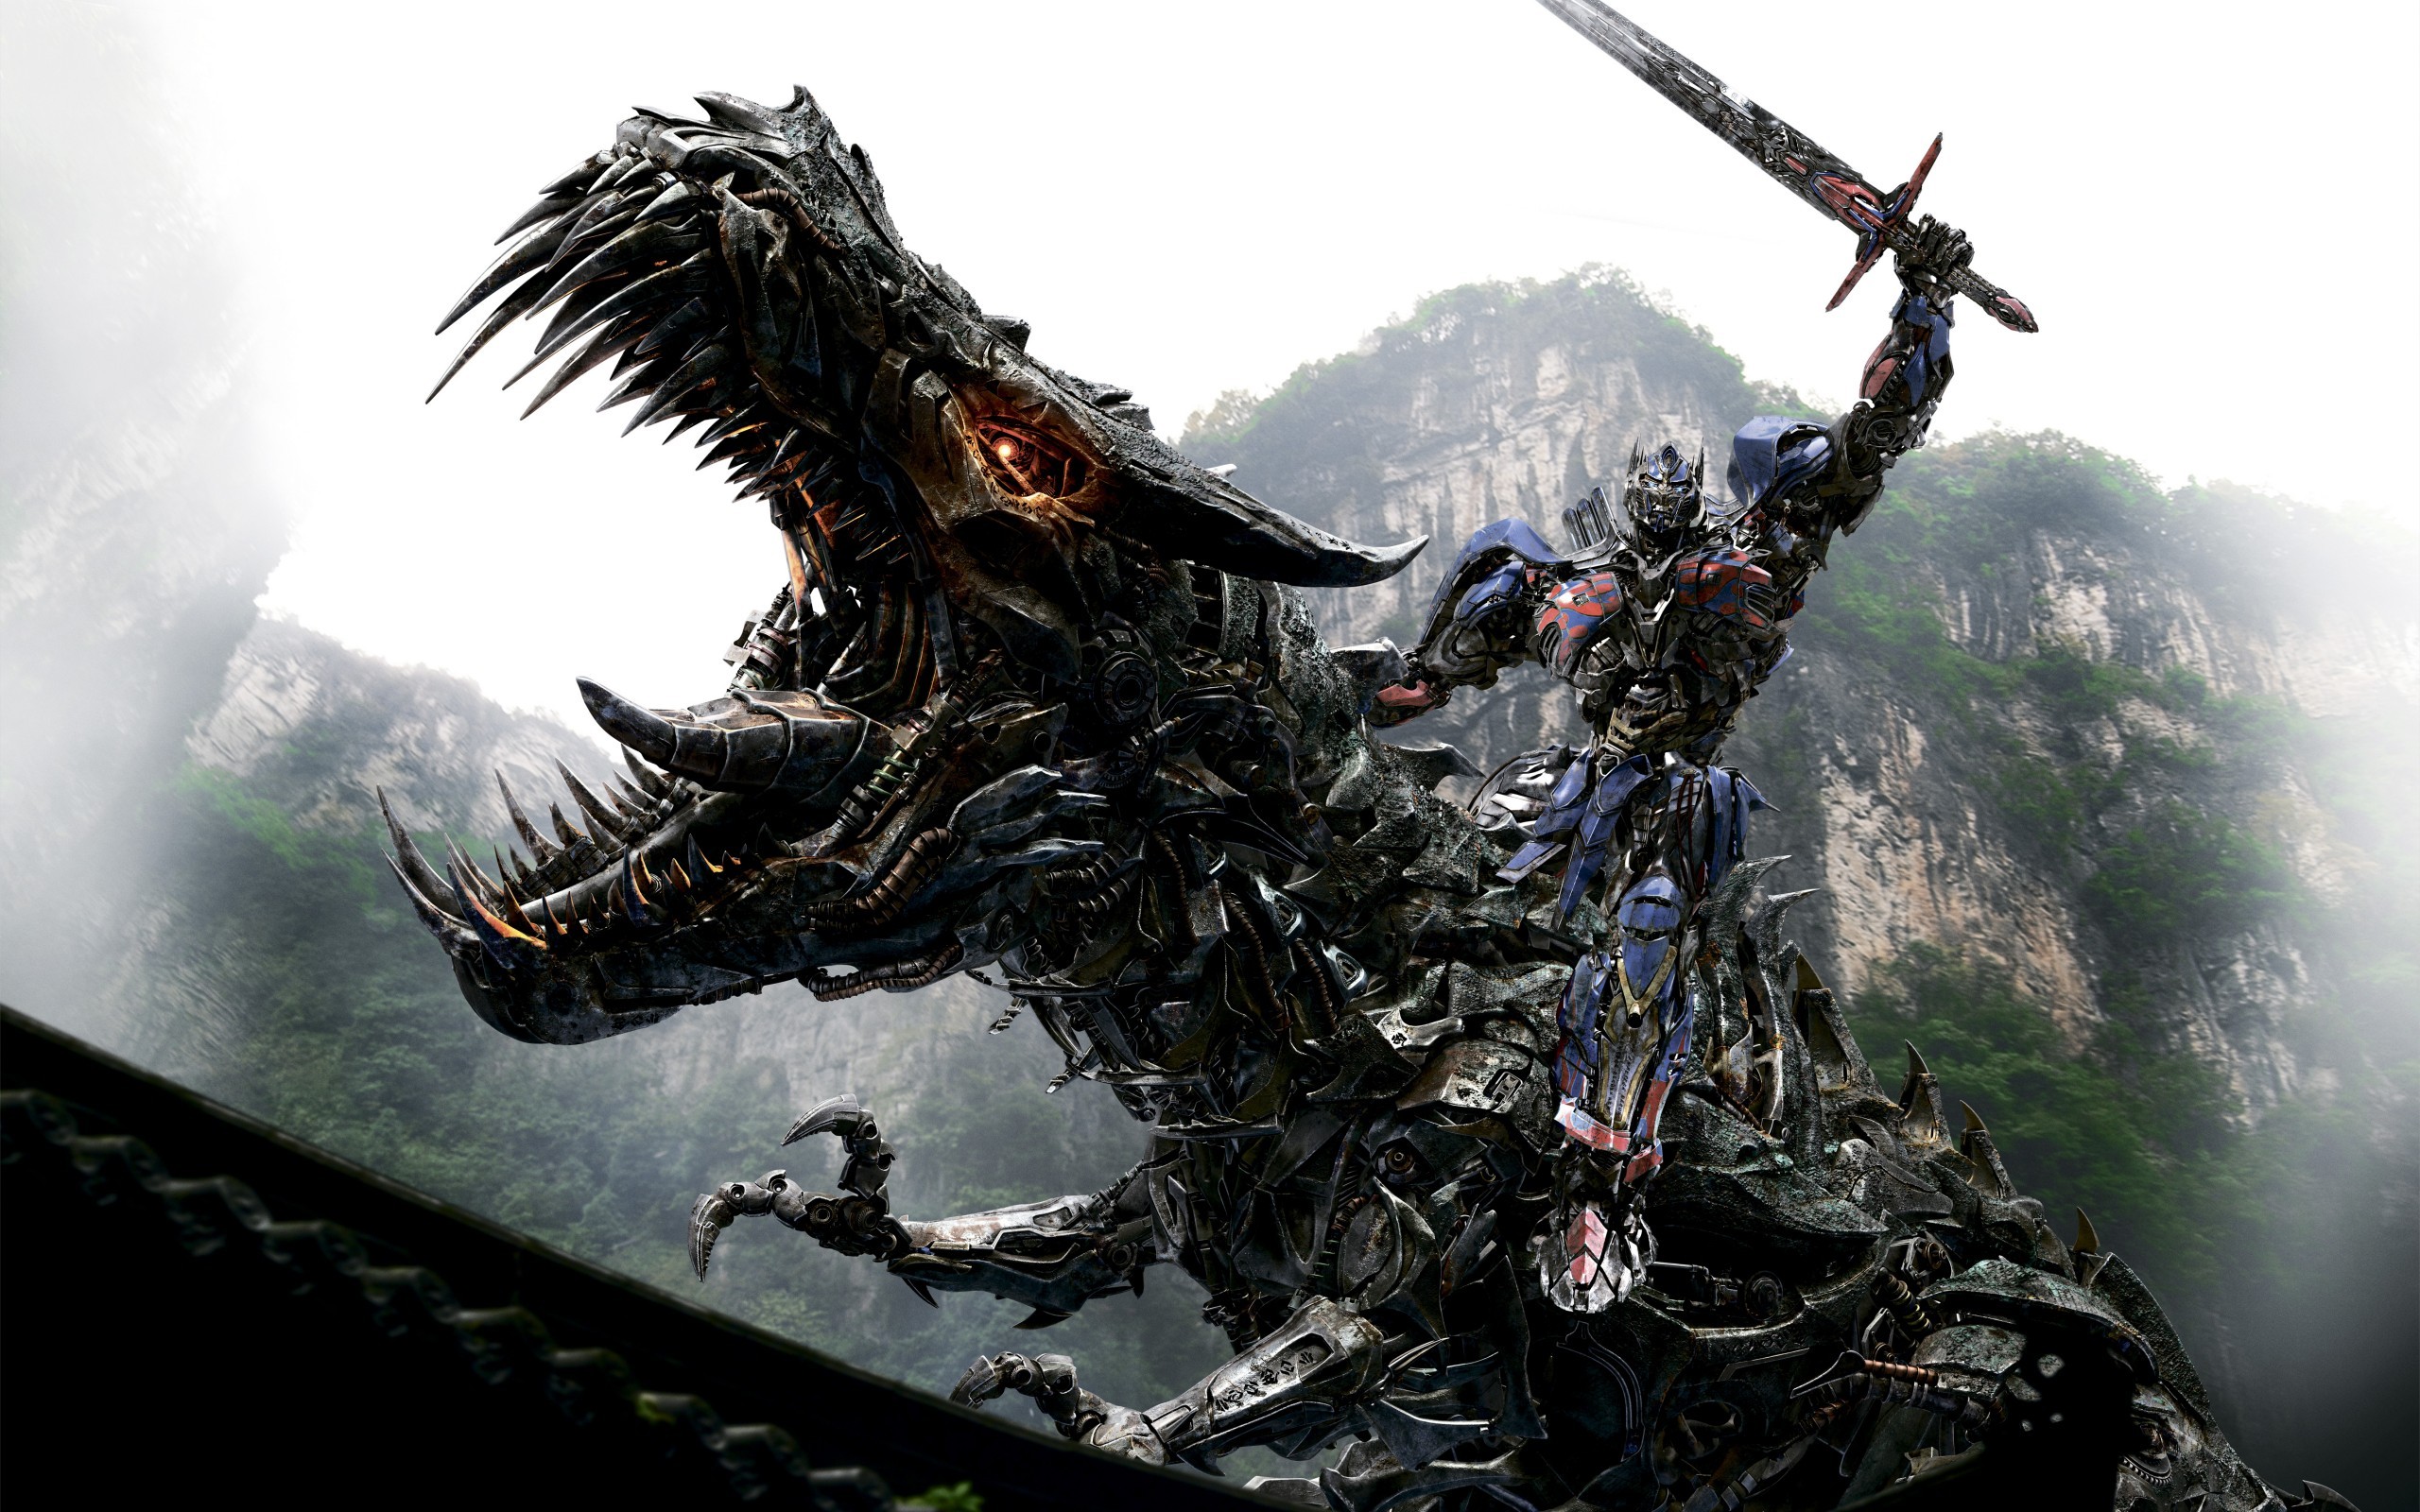 General 2560x1600 Transformers: Age of Extinction robot movies science fiction